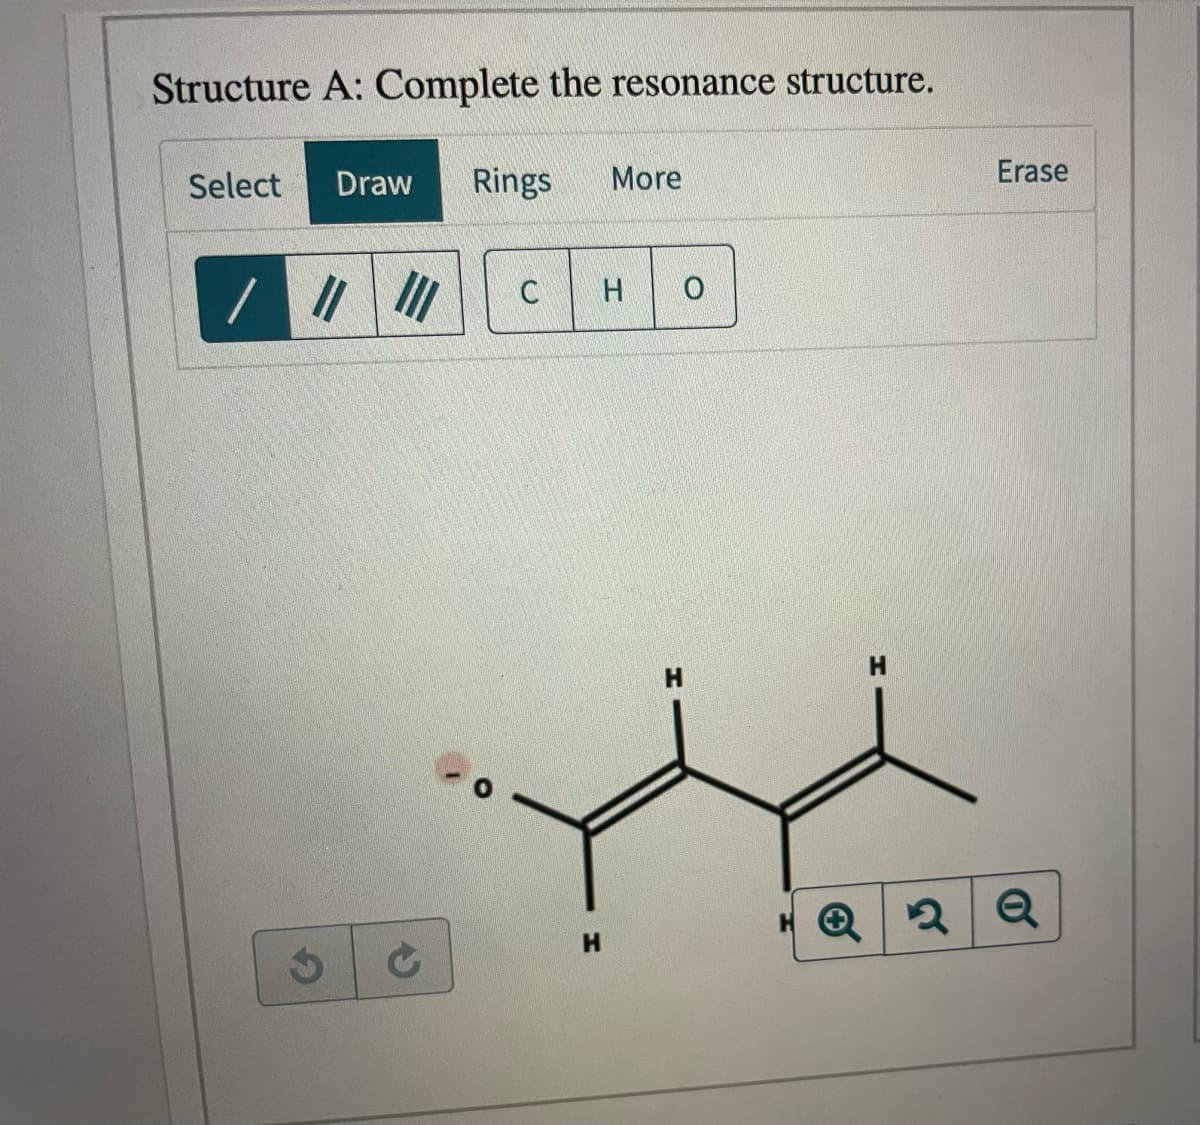 Structure A: Complete the resonance structure.
Select
Draw
Rings
More
Erase
C
H
H.
H.
H.
